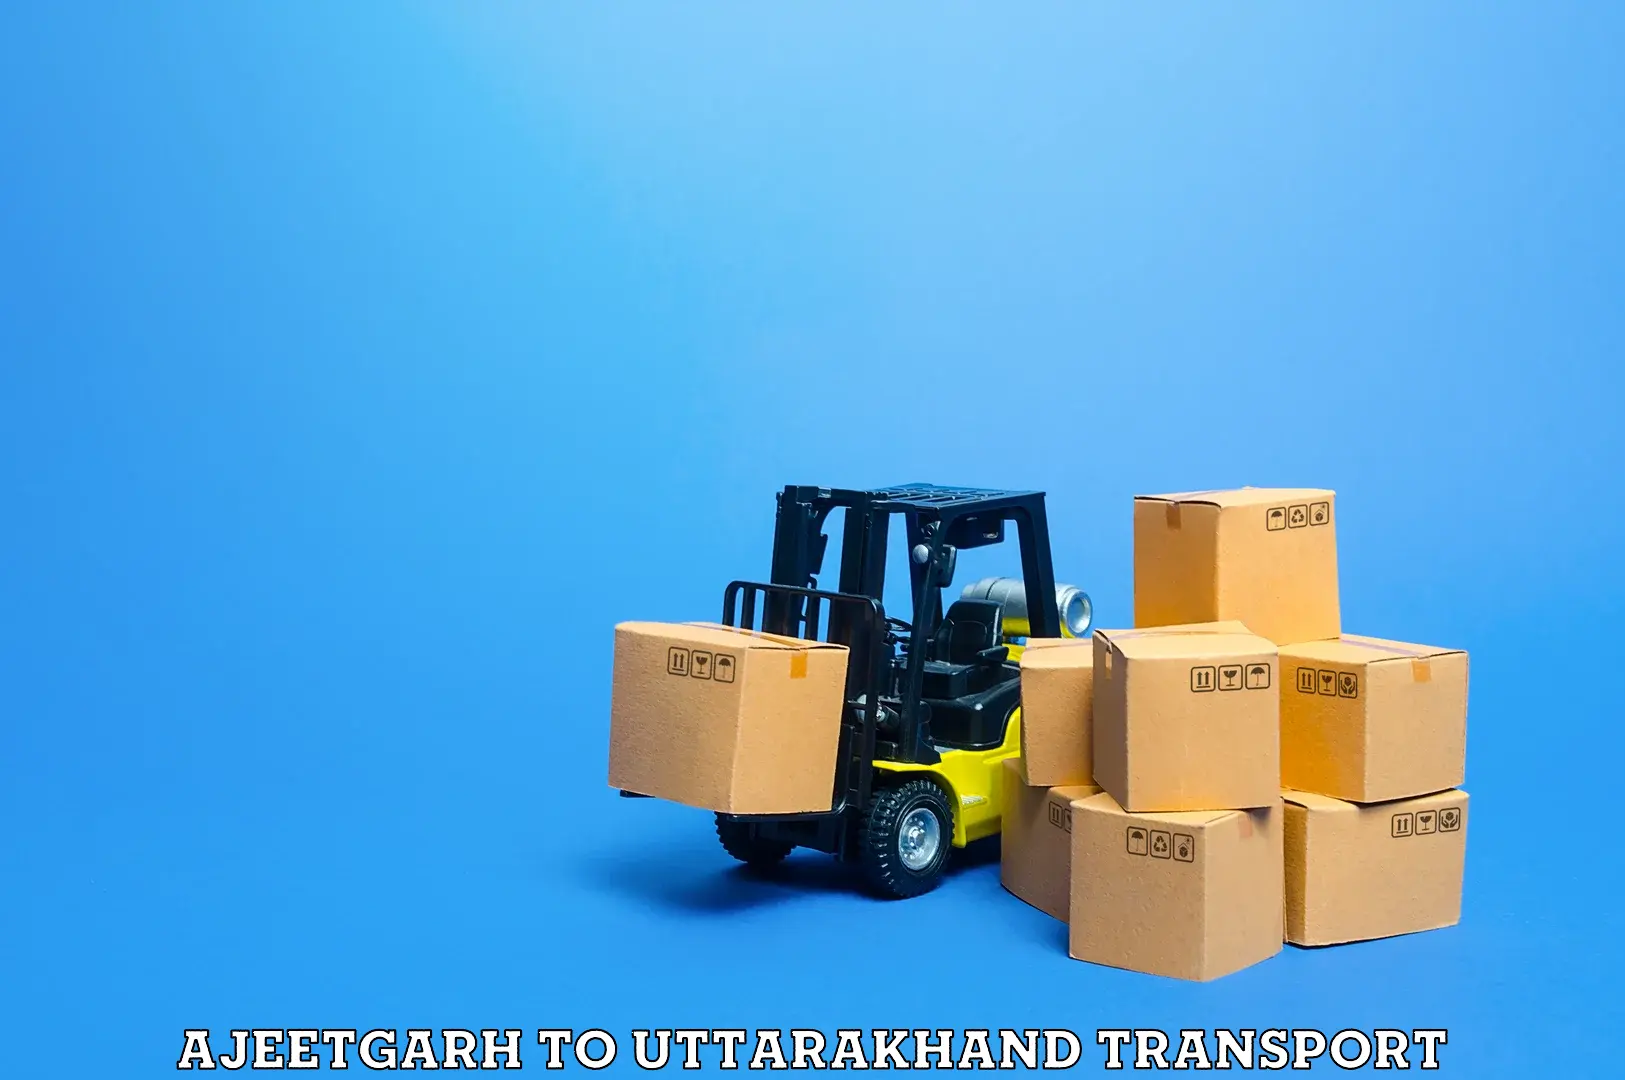 Pick up transport service Ajeetgarh to Roorkee